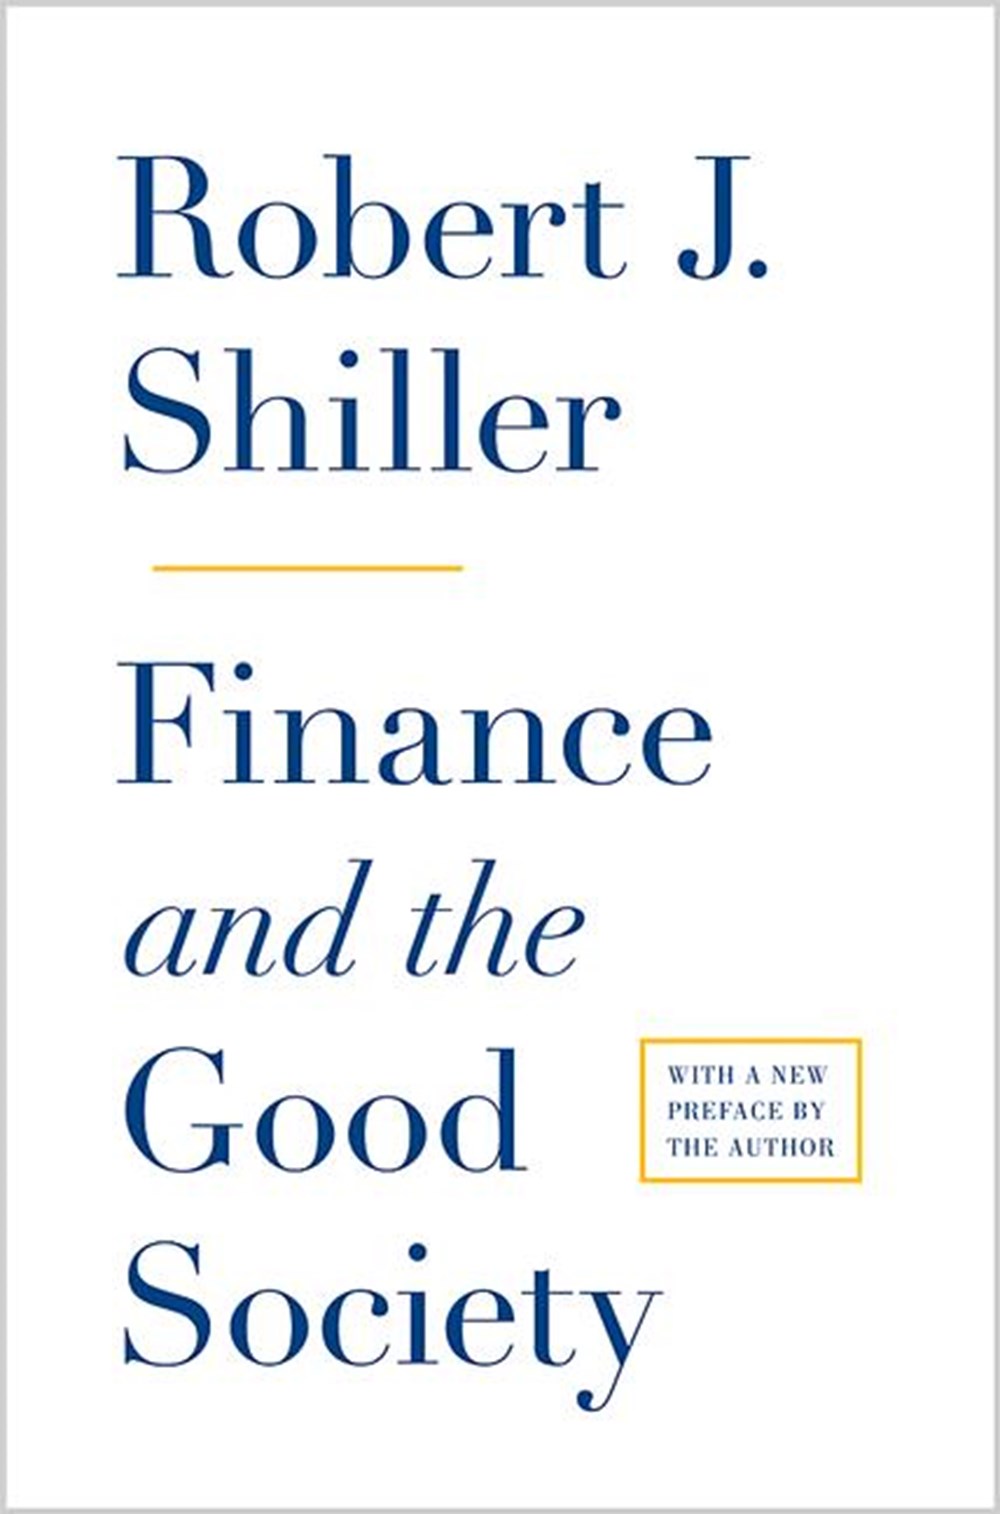 Finance and the Good Society